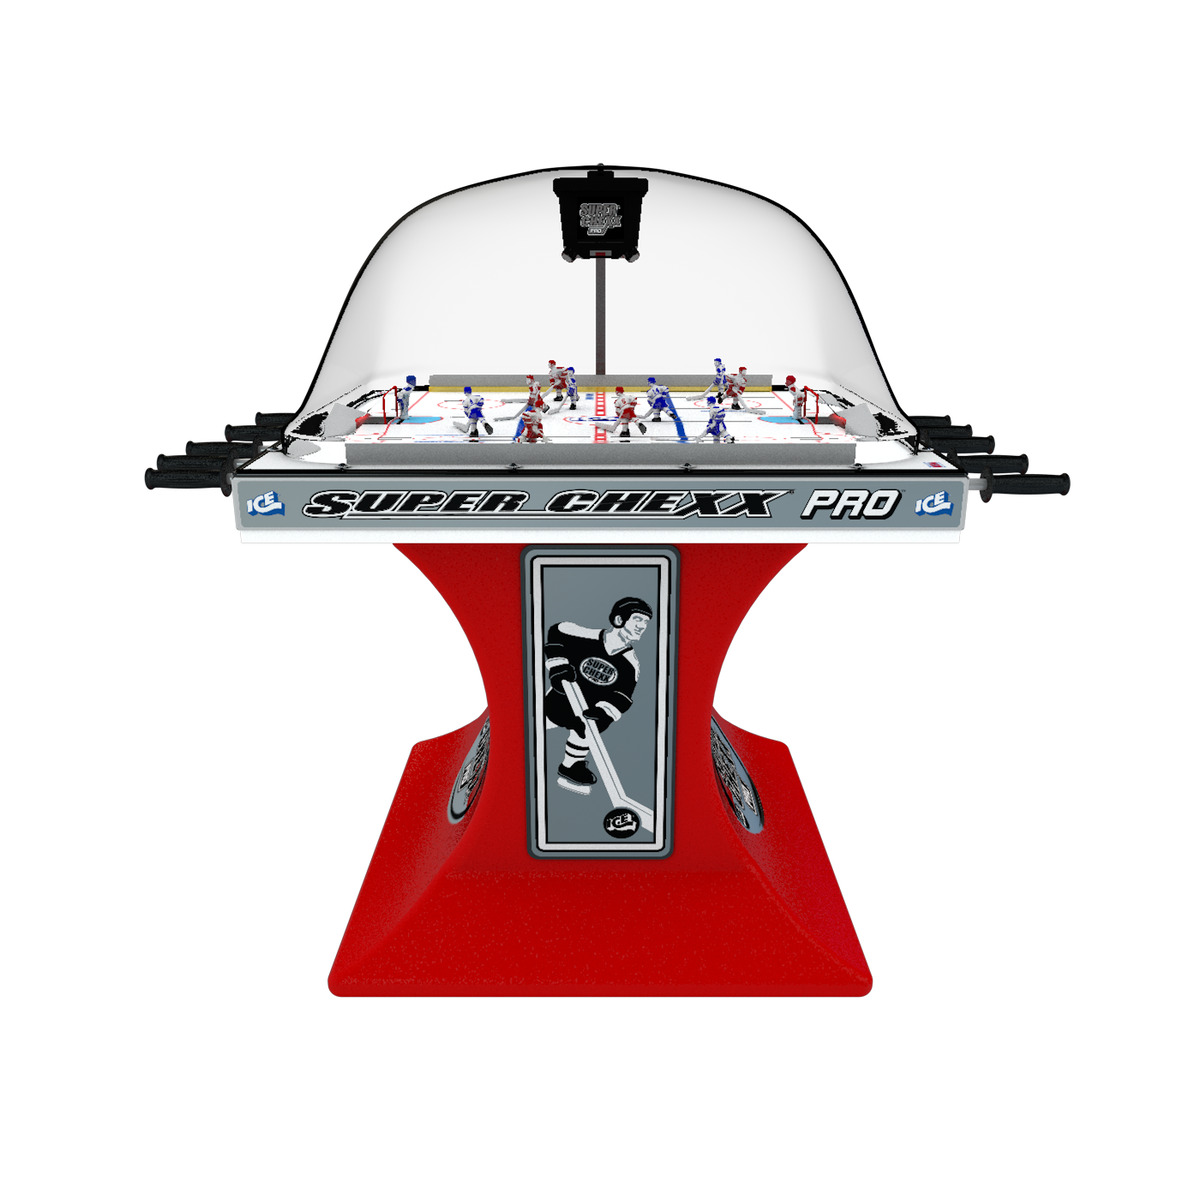 Dome Hockey Tables | Bubble Hockey Tables for Sale